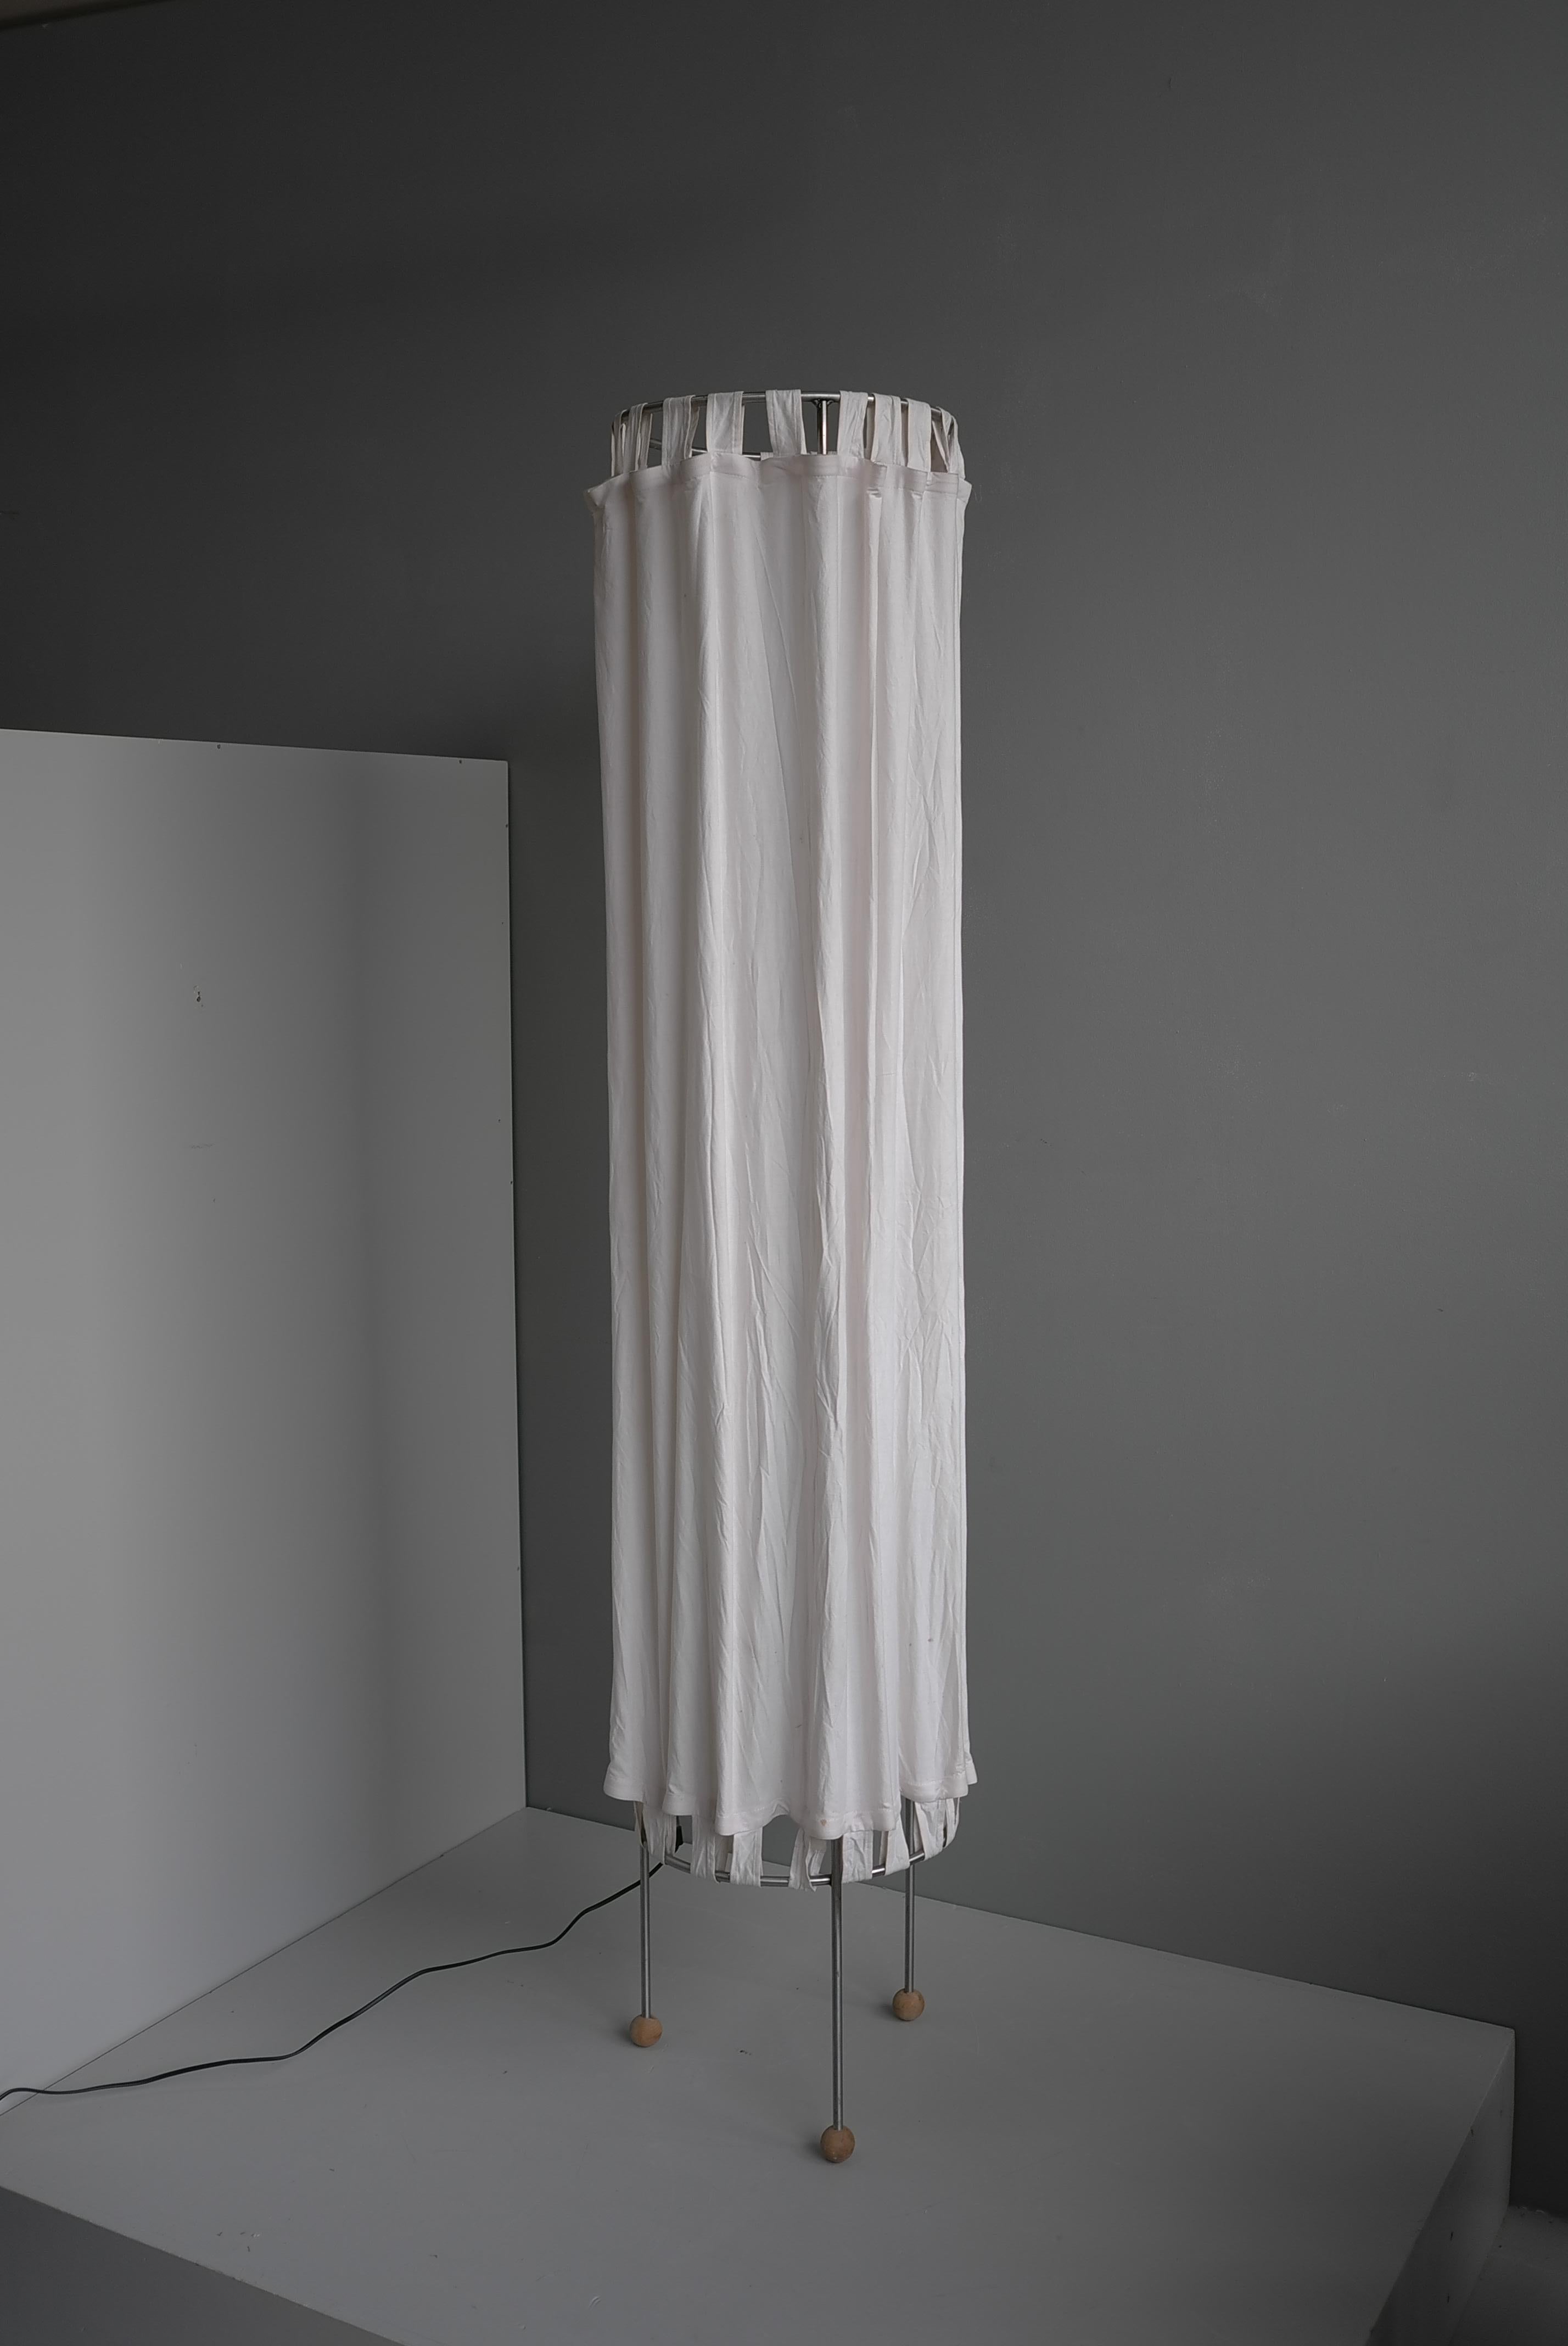 Extra Large White Linen Curtain Floorlamp, The Netherlands 1980's For Sale 3